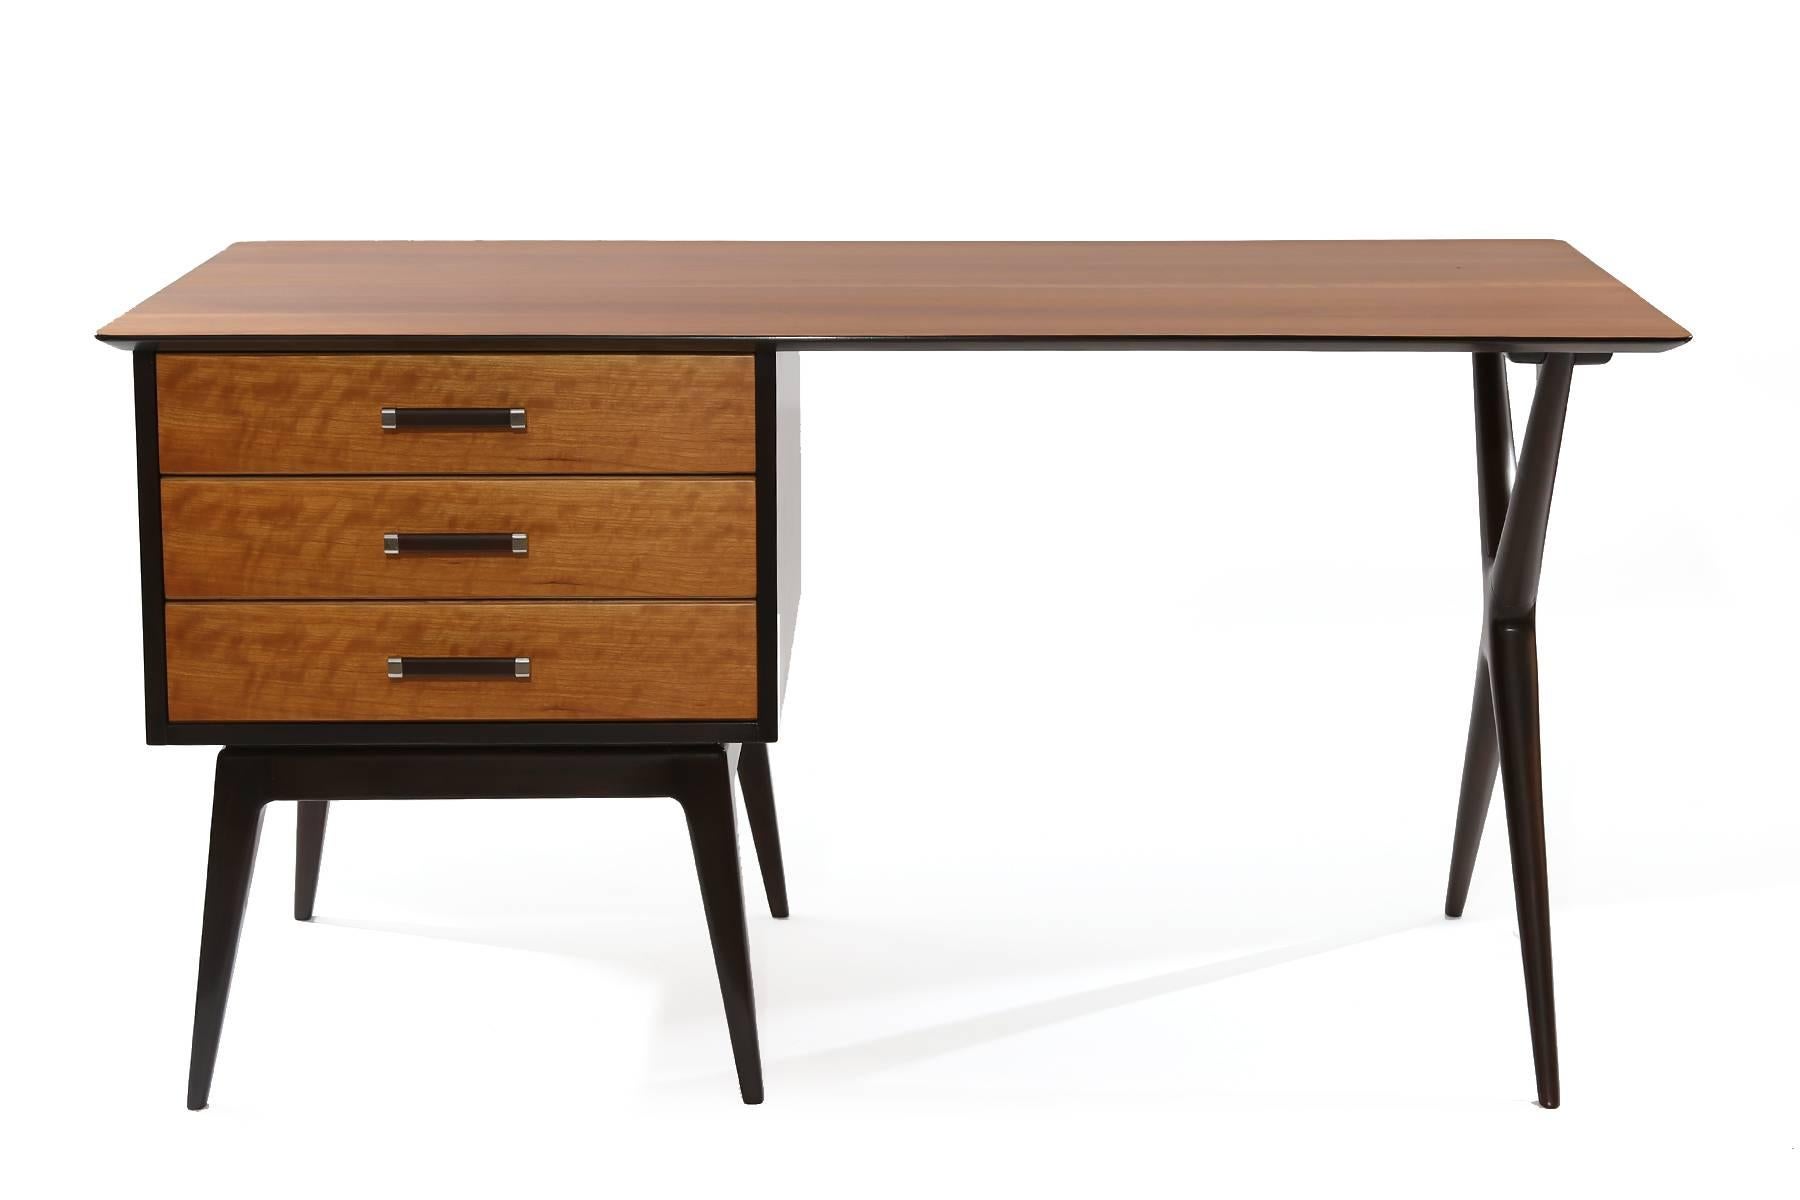 Renzo Rutili for Johnson Furniture Company partners desk, circa early 1960s. This two-tone example has beautiful curly maple top and drawer fronts juxtaposed with dark walnut lacquered drawer pulls and legs. It has drawers on both sides so can be a